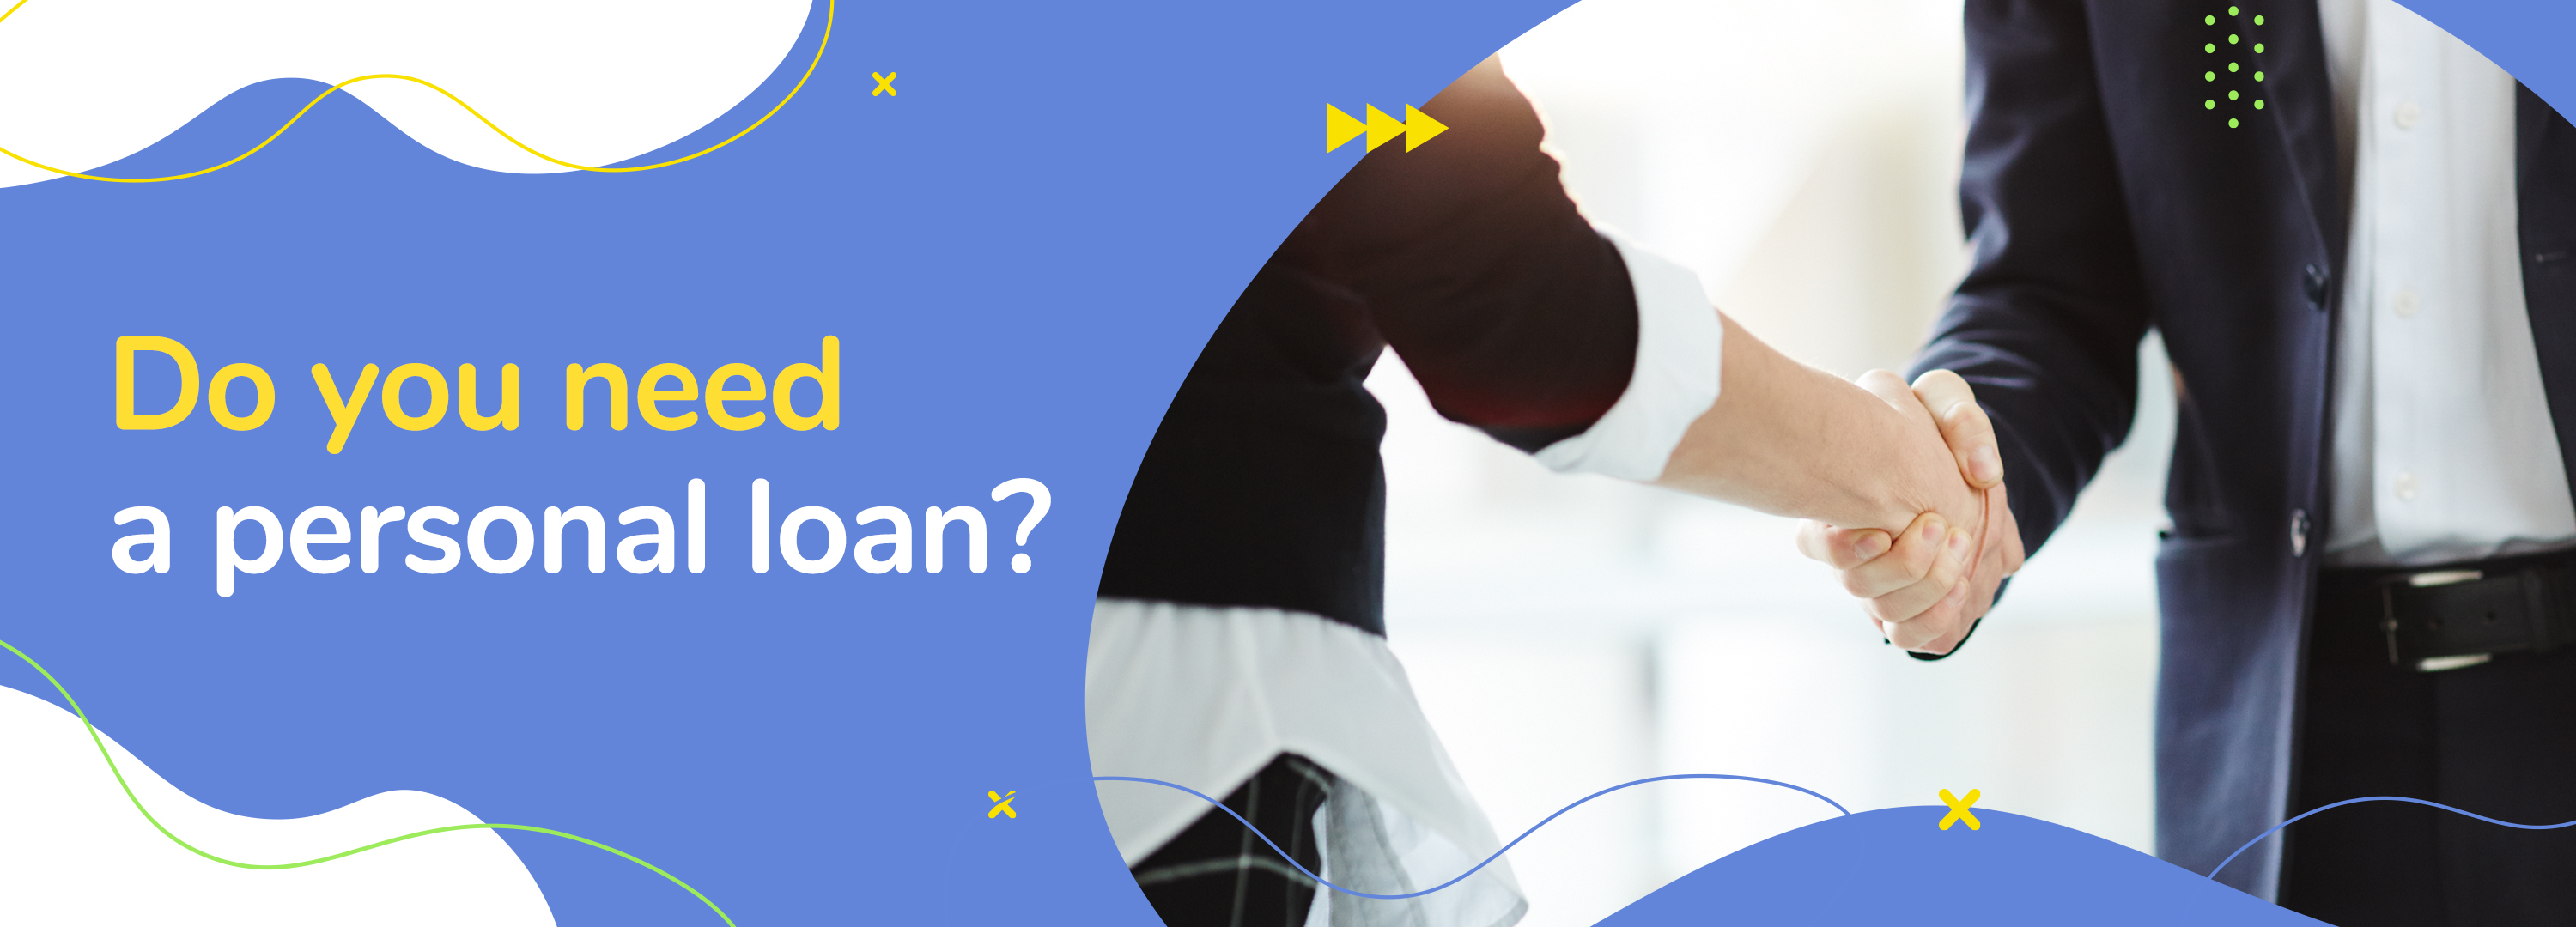 Do you need a personal loan?